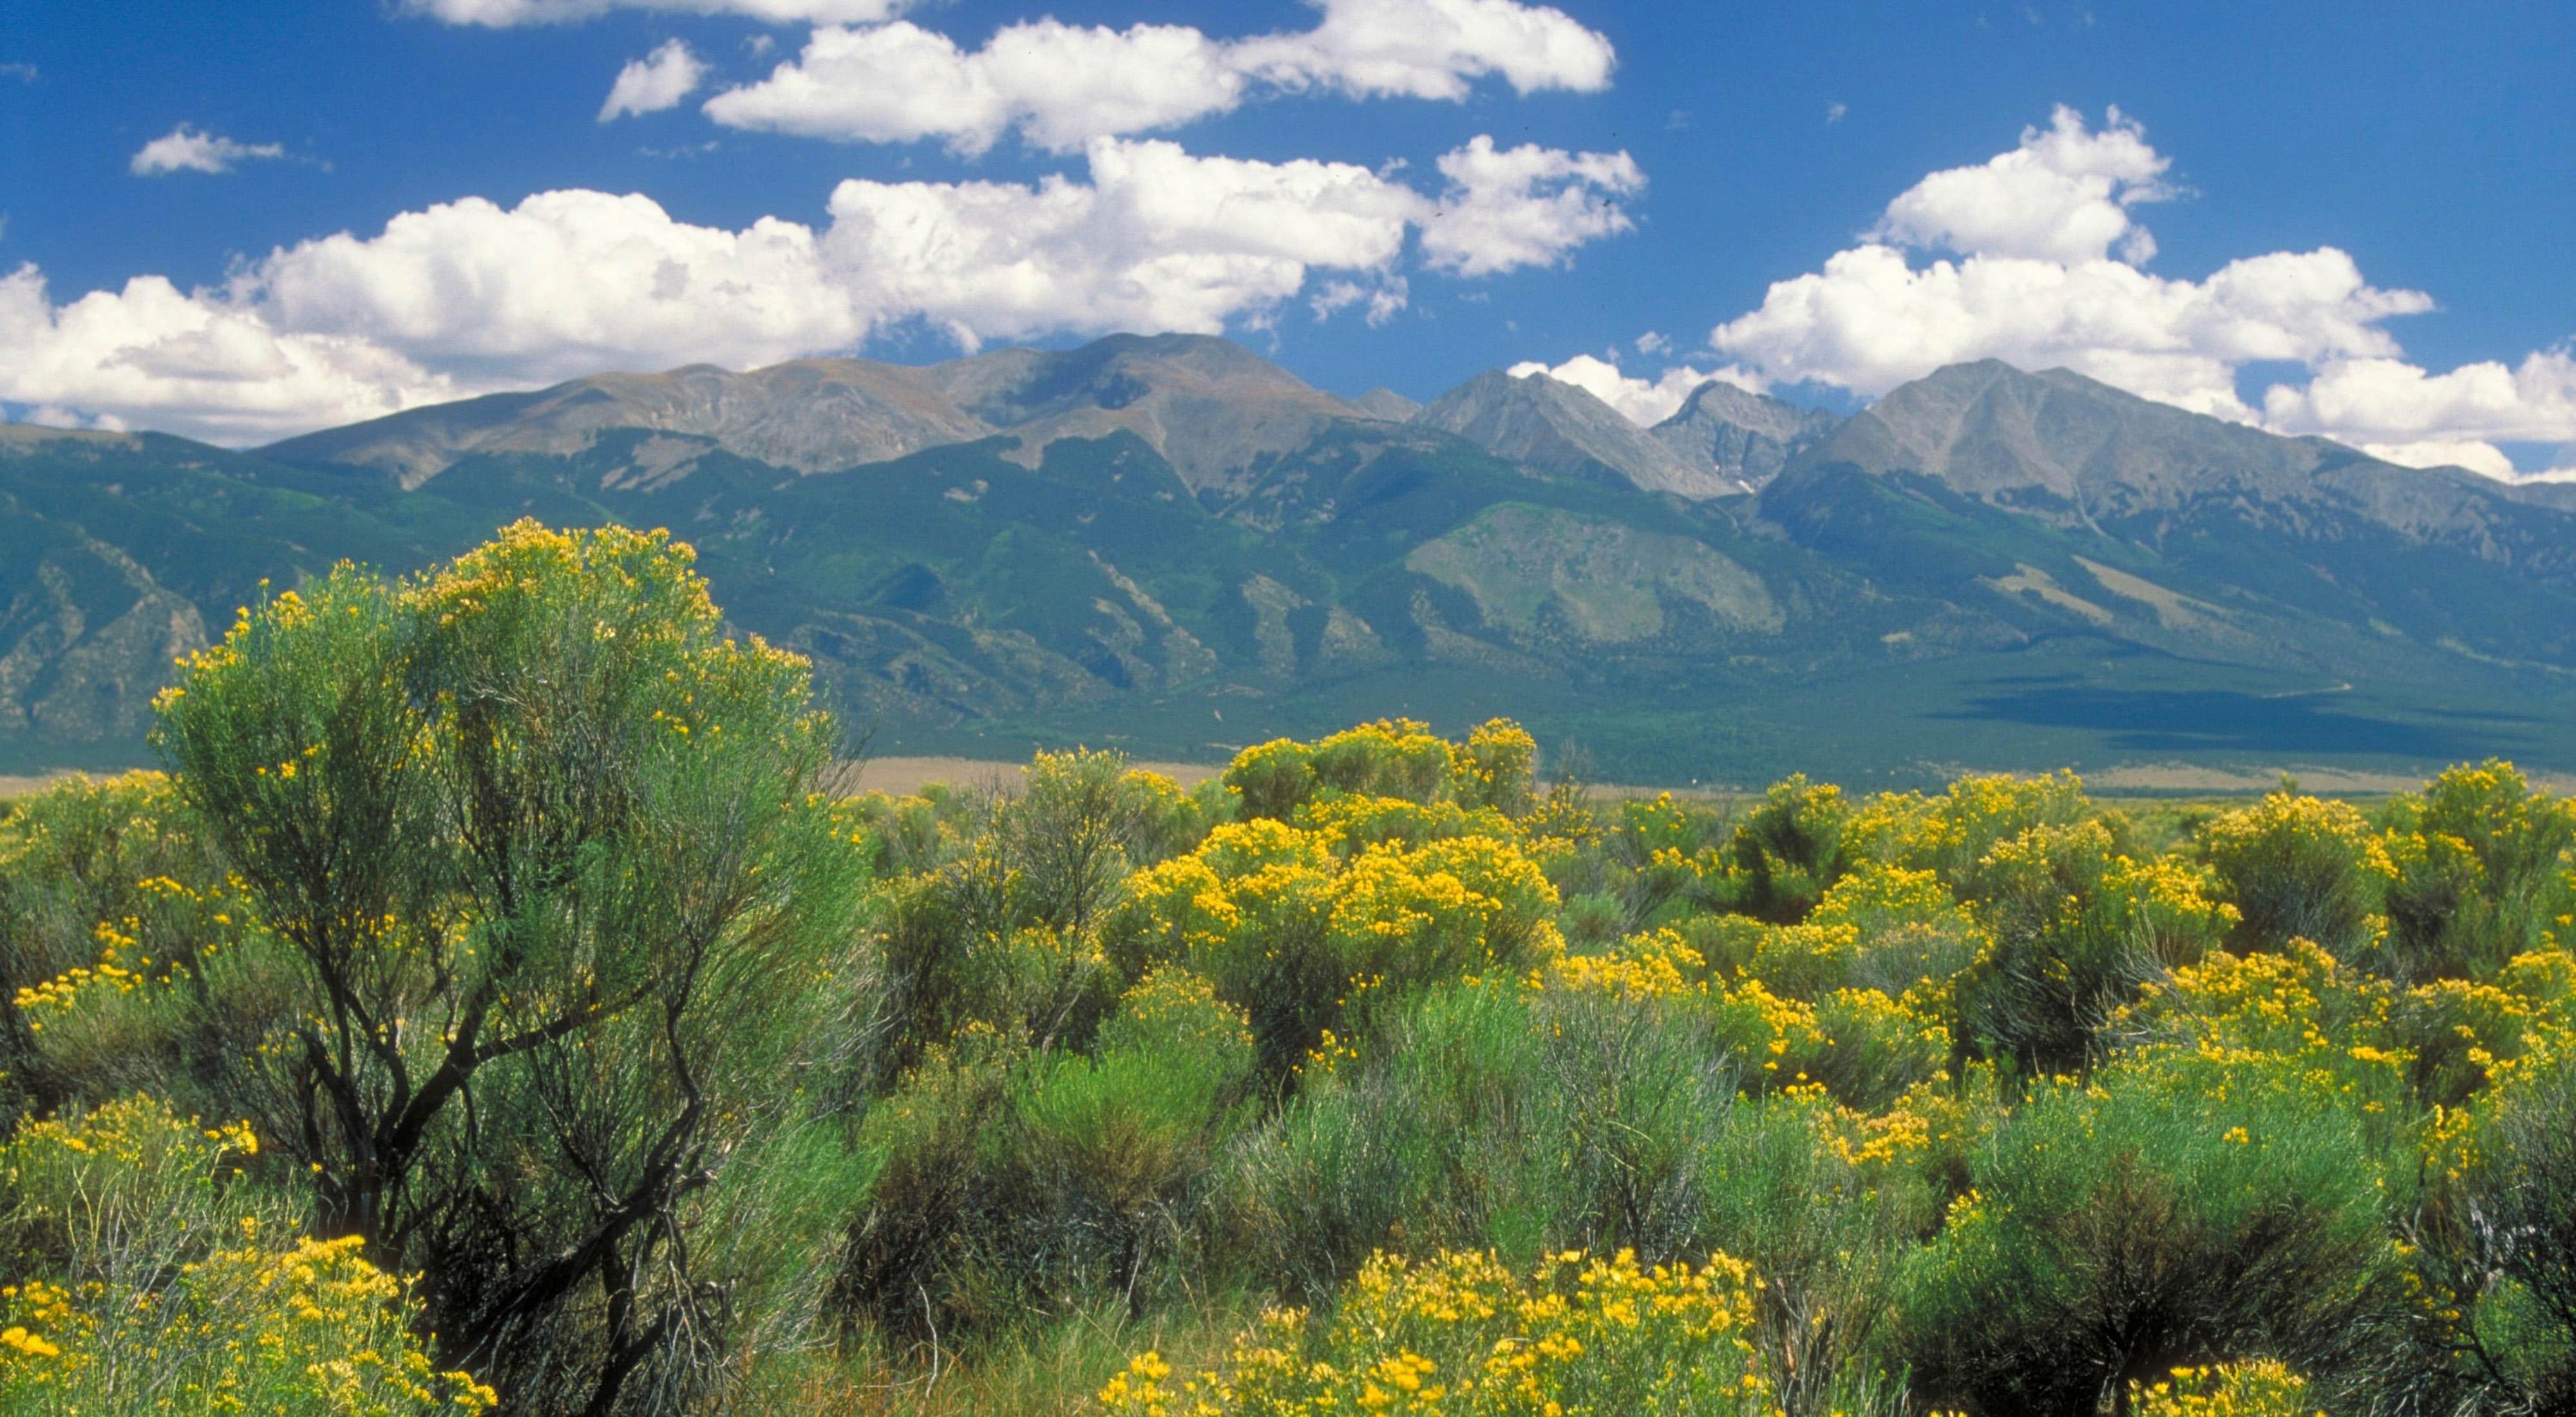 A dense thicket of shrubs with yellow flowers in the foreground with mountains in the background.